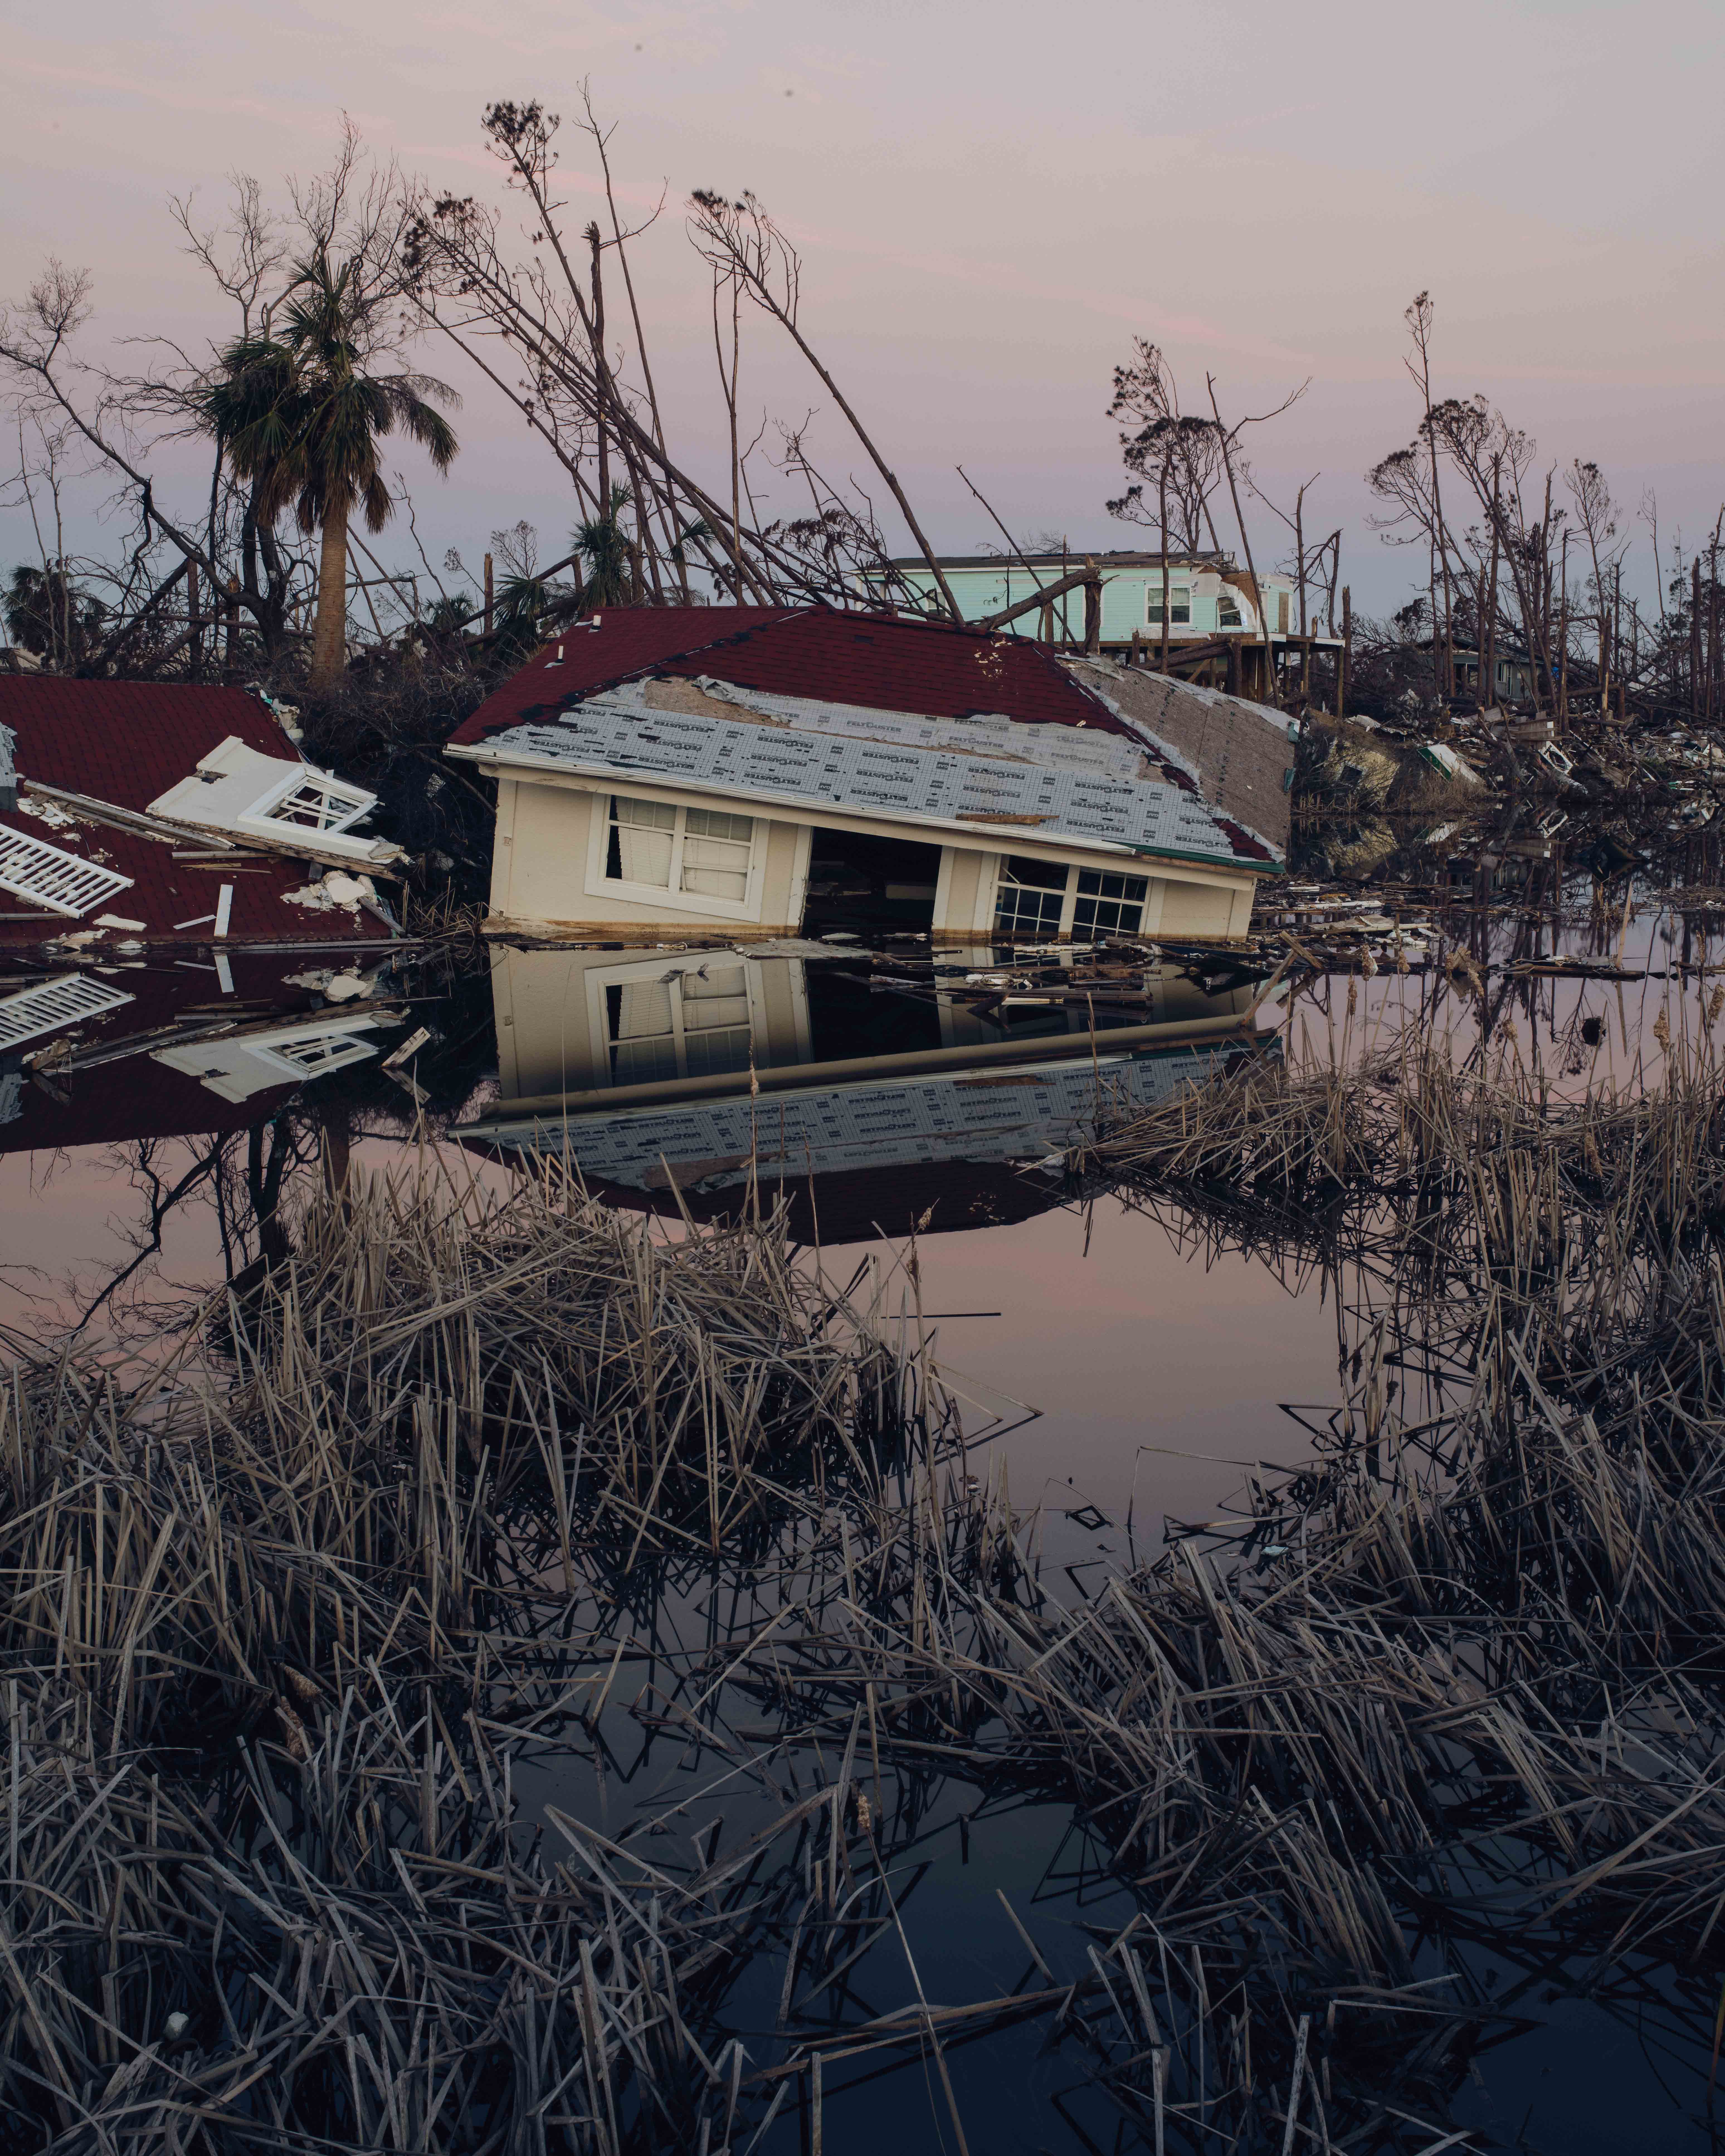  Bryan Thomas, Mexico Beach , 2019, from The Sea in the Darkness Calls (2015–ongoing)